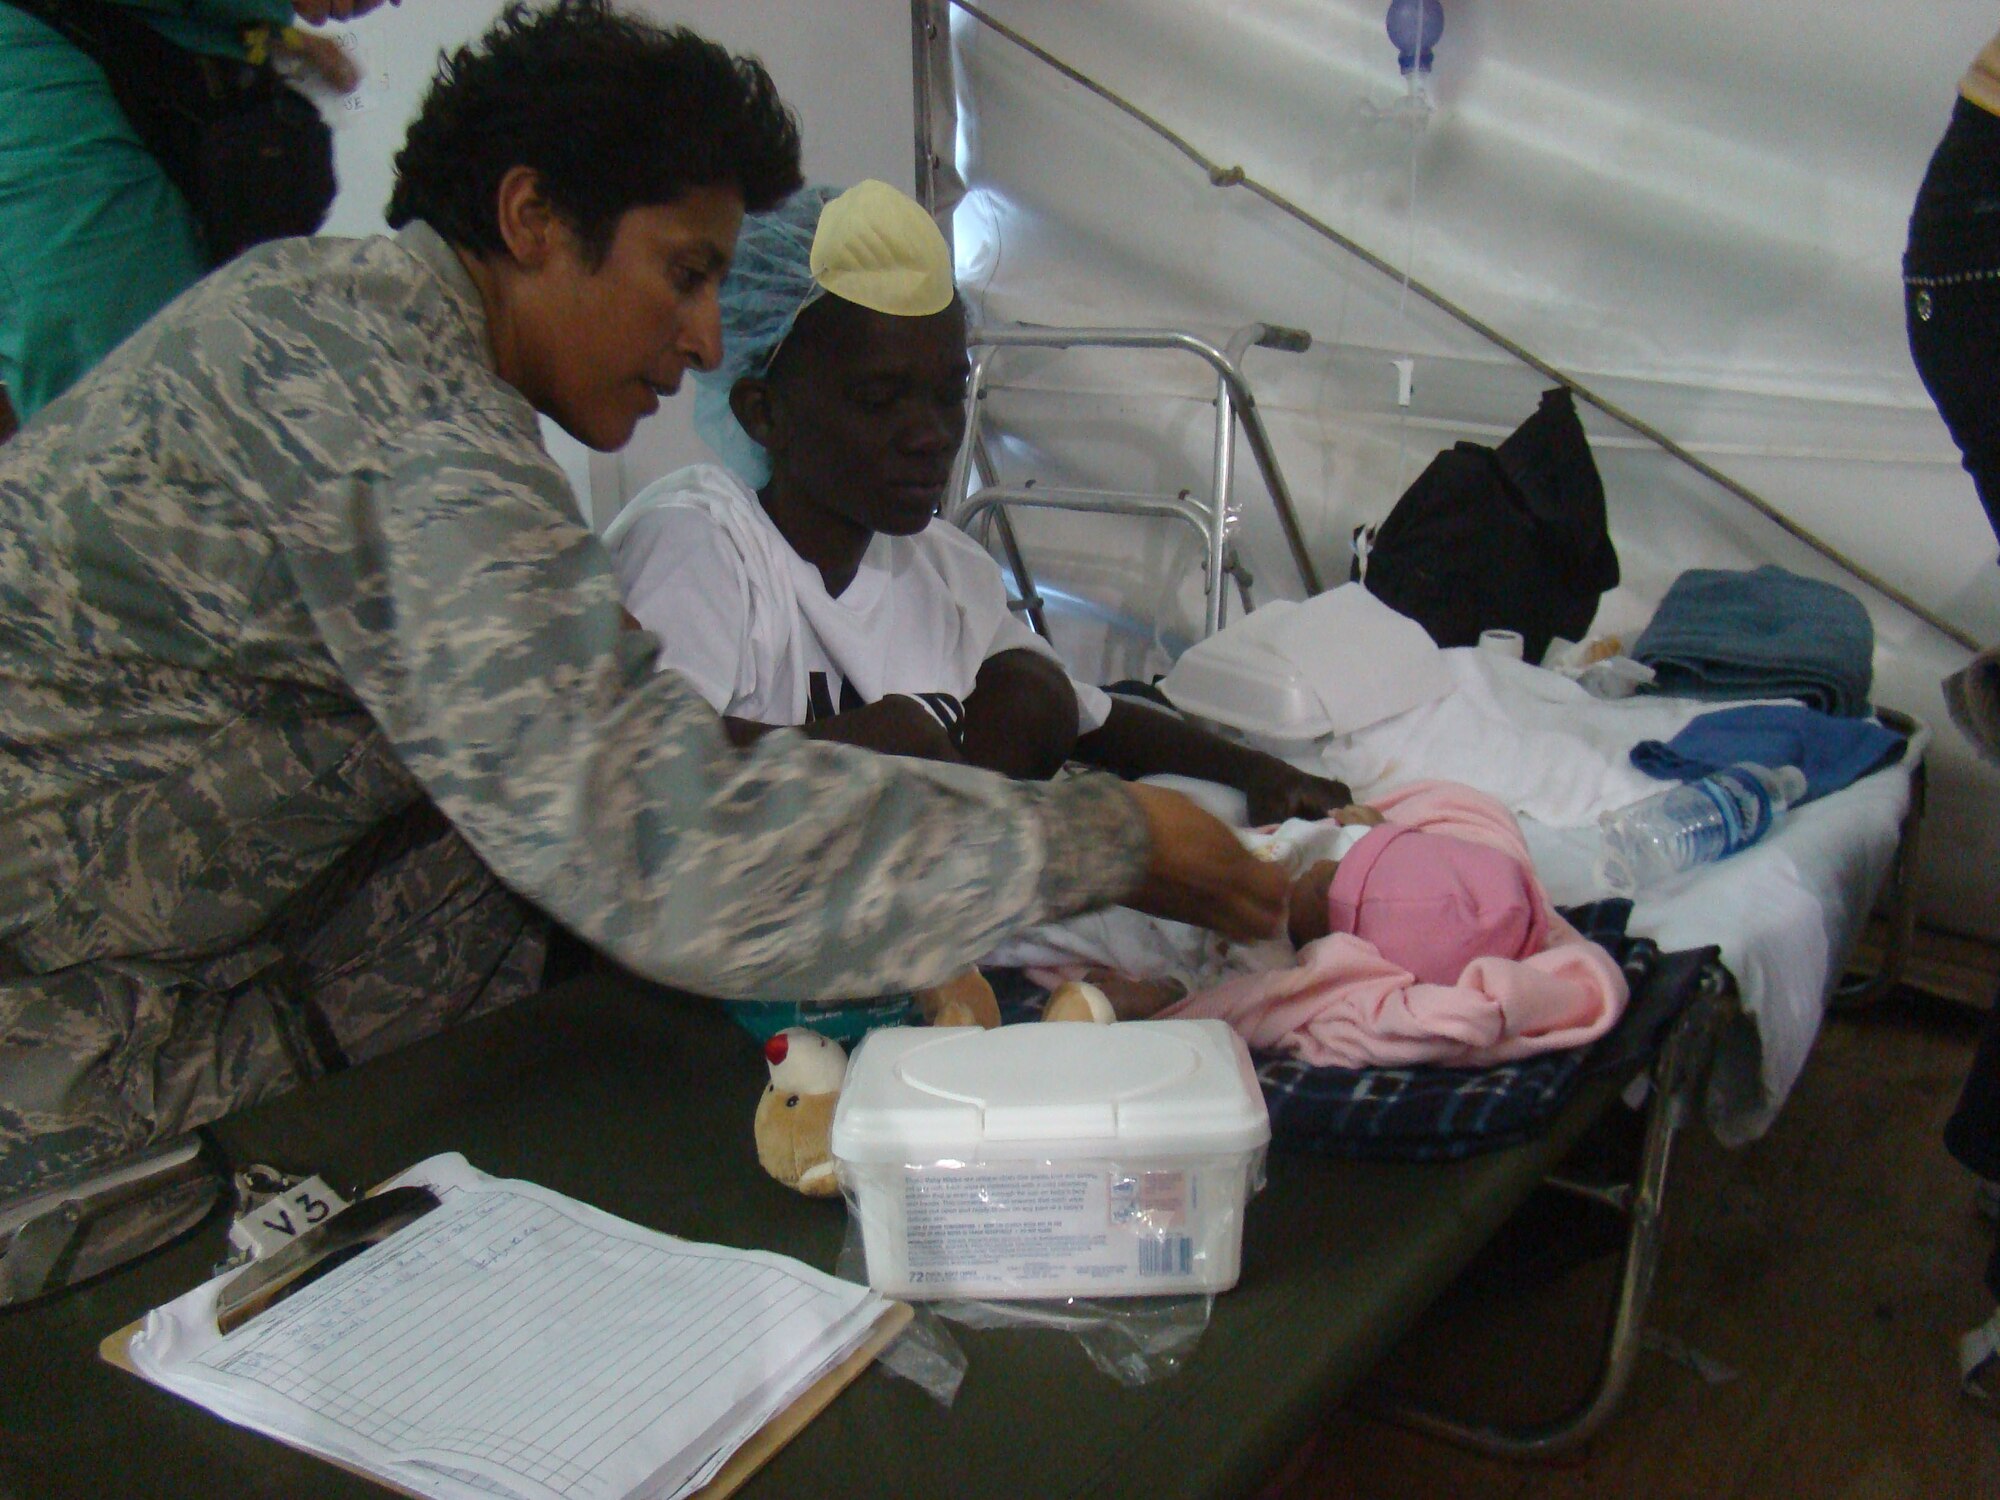 Chaplain (Capt.) Eusebia D. Rios blesses one of three triplets in the children's ward of the University of Miami Hospital compound adjacent to the Toussaint L'Ouverture International Airport in Port au Prince, Haiti, Jan. 29, 2010. The babies were born in the wake of the 7.1 magnitude earthquake which devastated the capital city Jan.12, 2010. Chaplain Rios, deployed from the 27th Special Operations Wing at Cannon Air Force Base, N.M. serves as the only chaplain to more than 1,500 military men and women encamped at the airport as part of Operation Unified Response. Known as the "Happy Chappy," Chaplain Rios ranges the airport day and night ministering to the needs of military and civilian alike, lifting their spirits and raising morale with each "Amen" she offers. (U.S. Air Force photo by Chief Master Sgt. Ty Foster)              